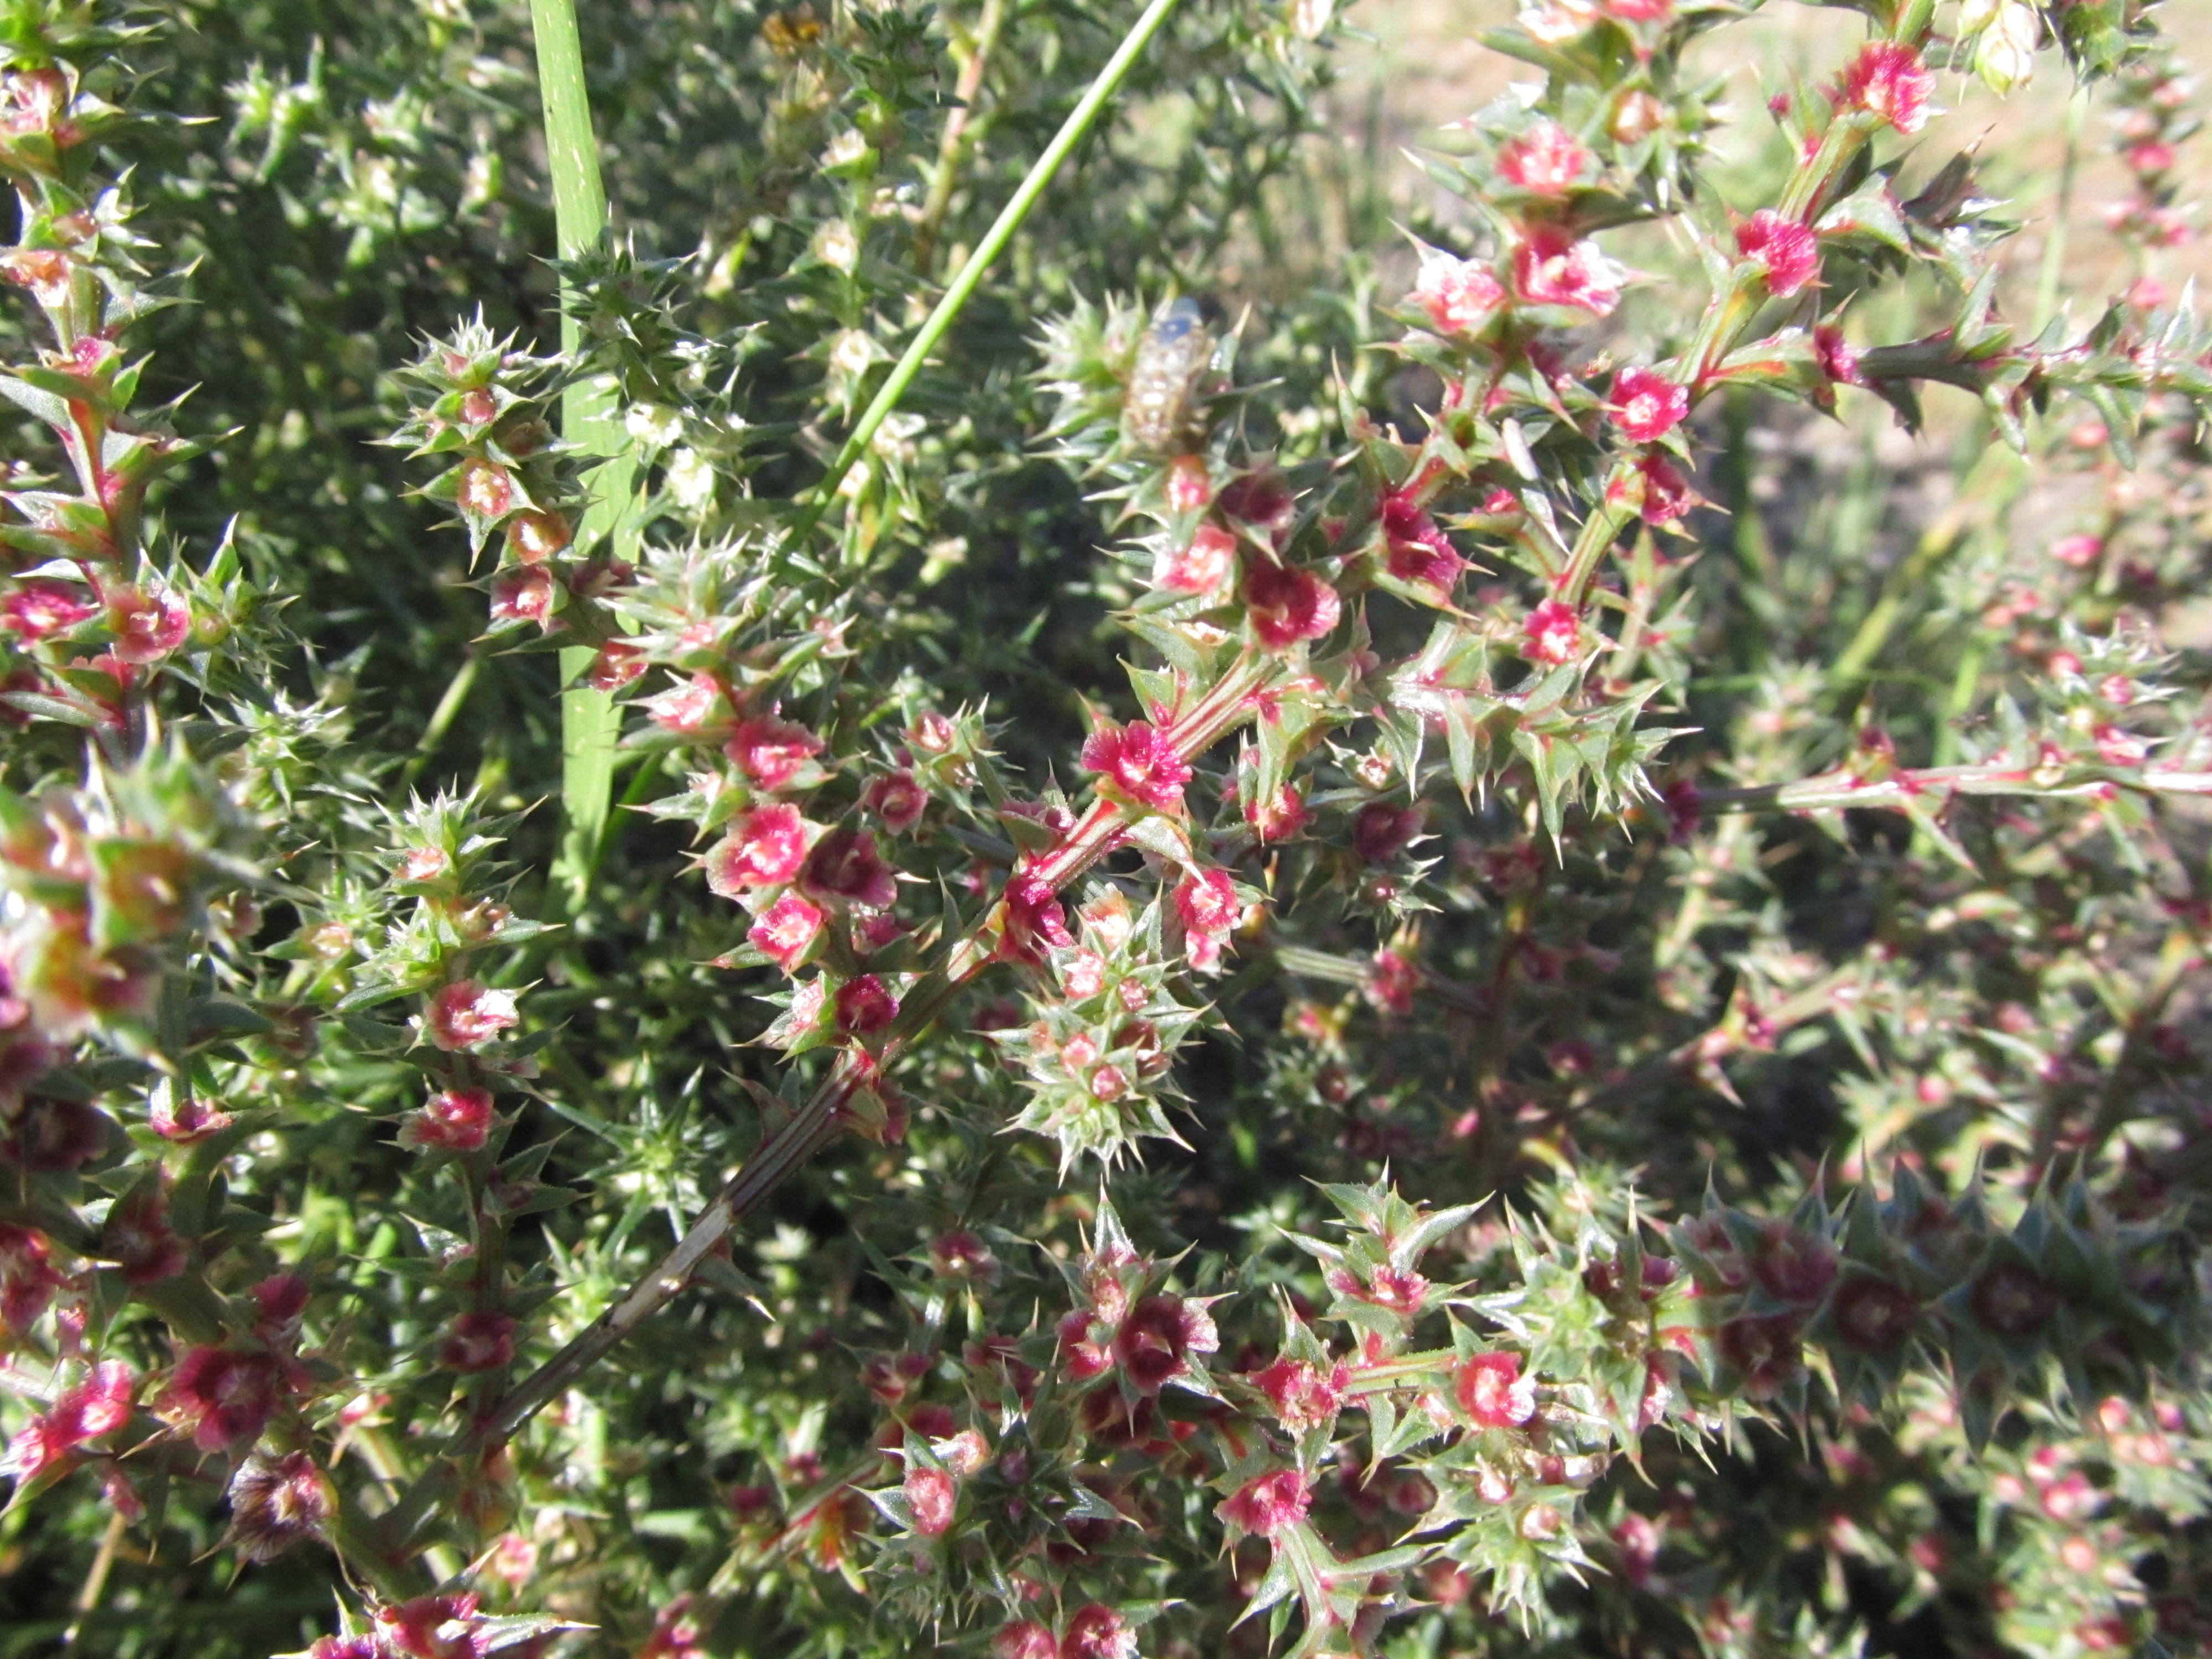 Close-up of green, flowering tumbleweed, a spiny plant with red flowers.